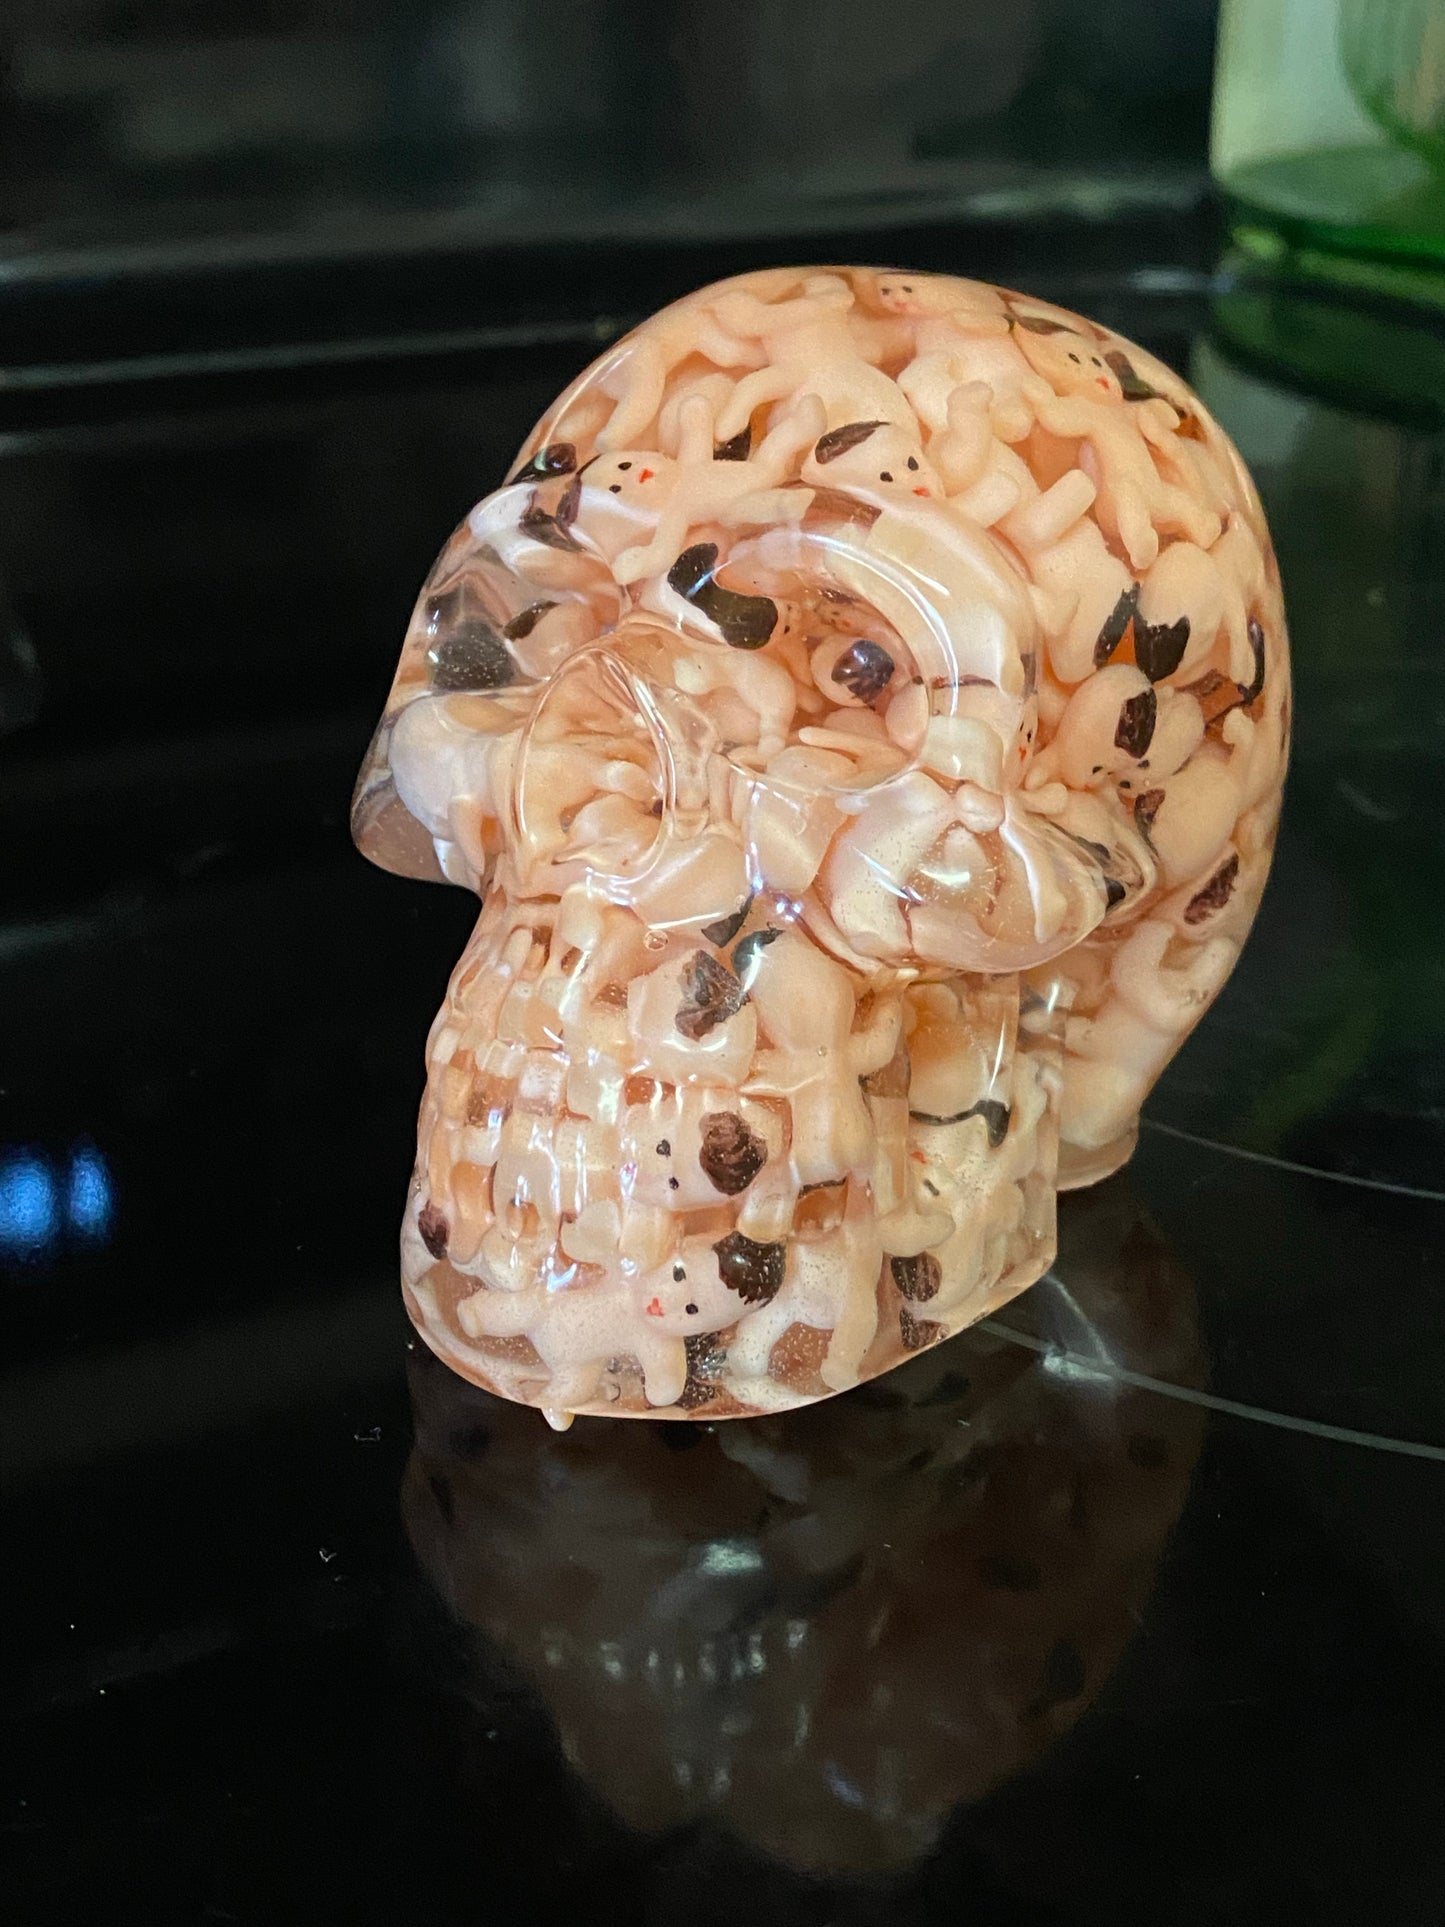 Skull made out of tiny plastic babies